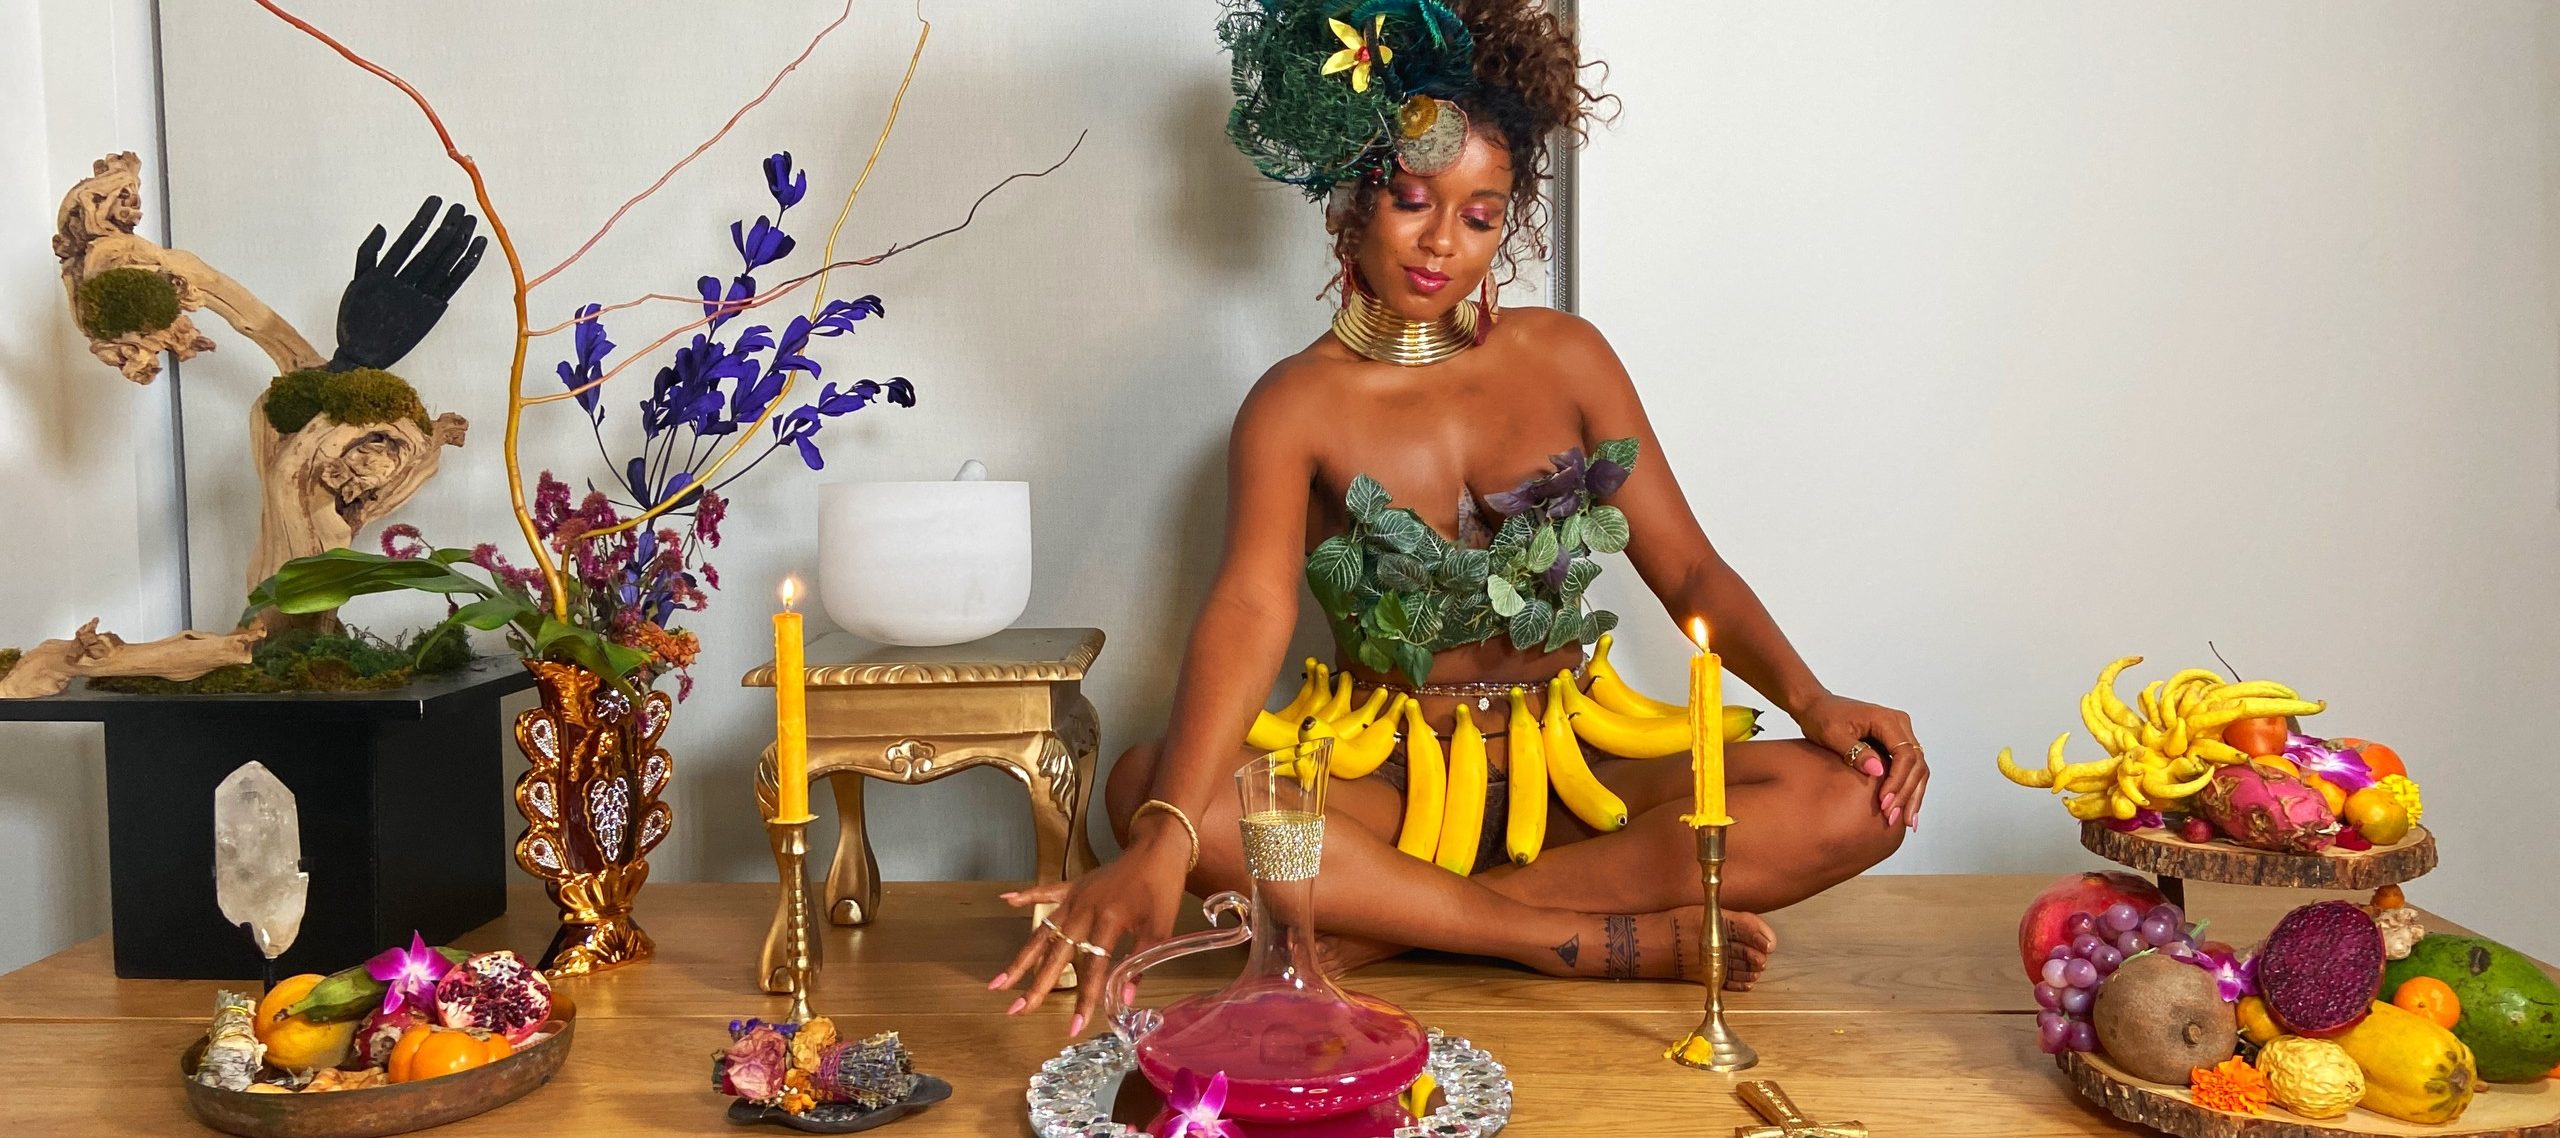 A medium-dark skinned adult woman sits cross-legged on a long wooden table set with platters of colorful fruit, candles, plants, and a pitcher of a pink liquid. She wears green leaves on her chest, gold jewelry, a skirt of bananas, and her hair pulled up with green feathers.